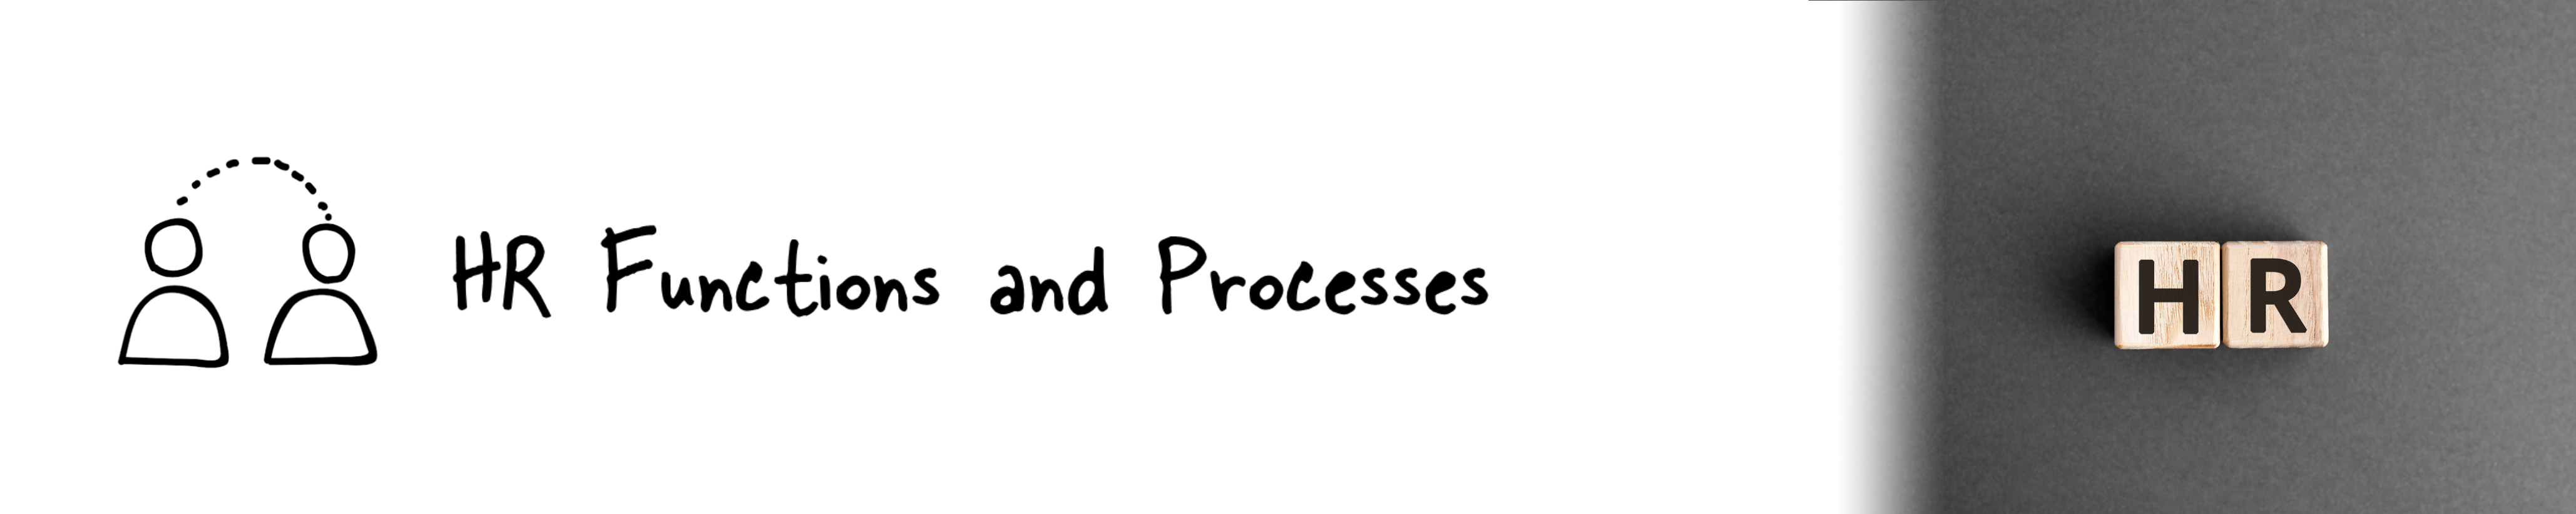 HR functions and Processes